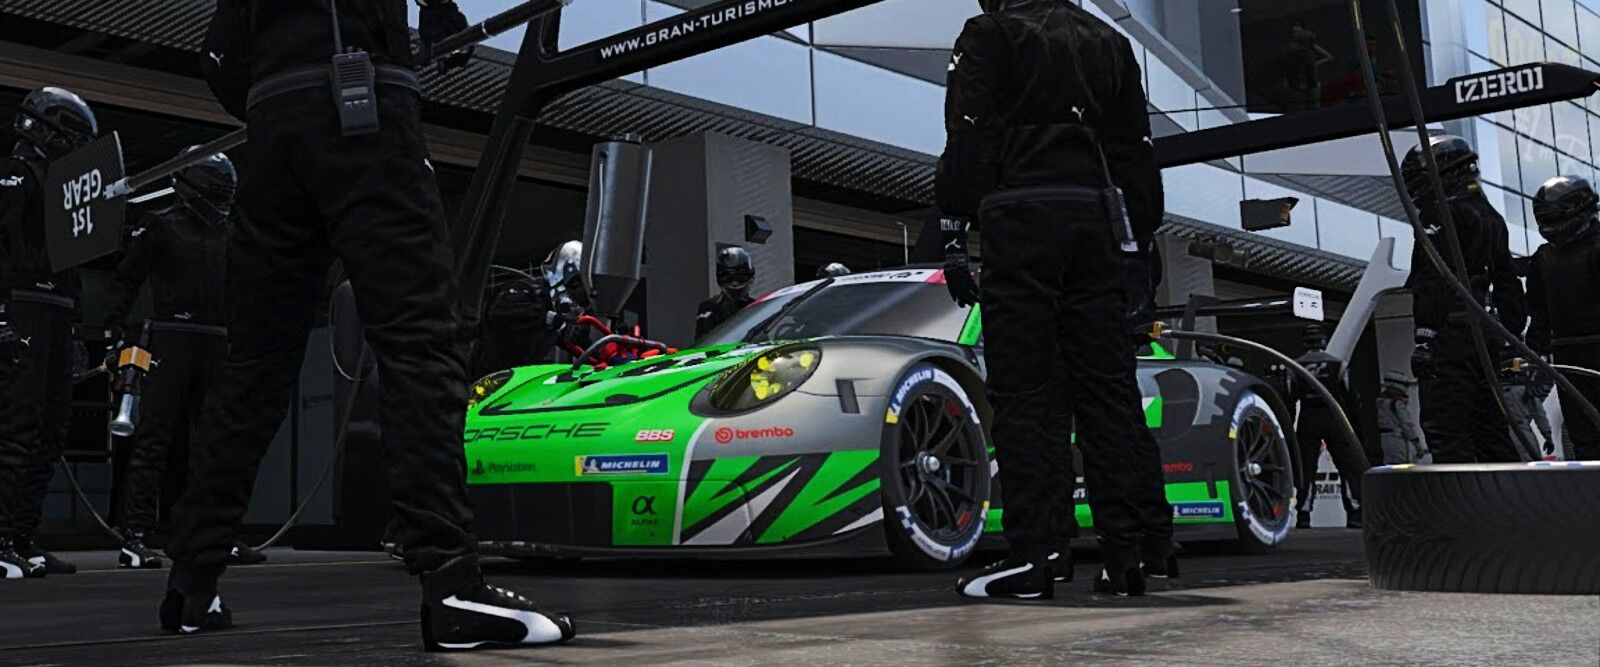 A green and dark silver Porsche being serviced in the pit box.